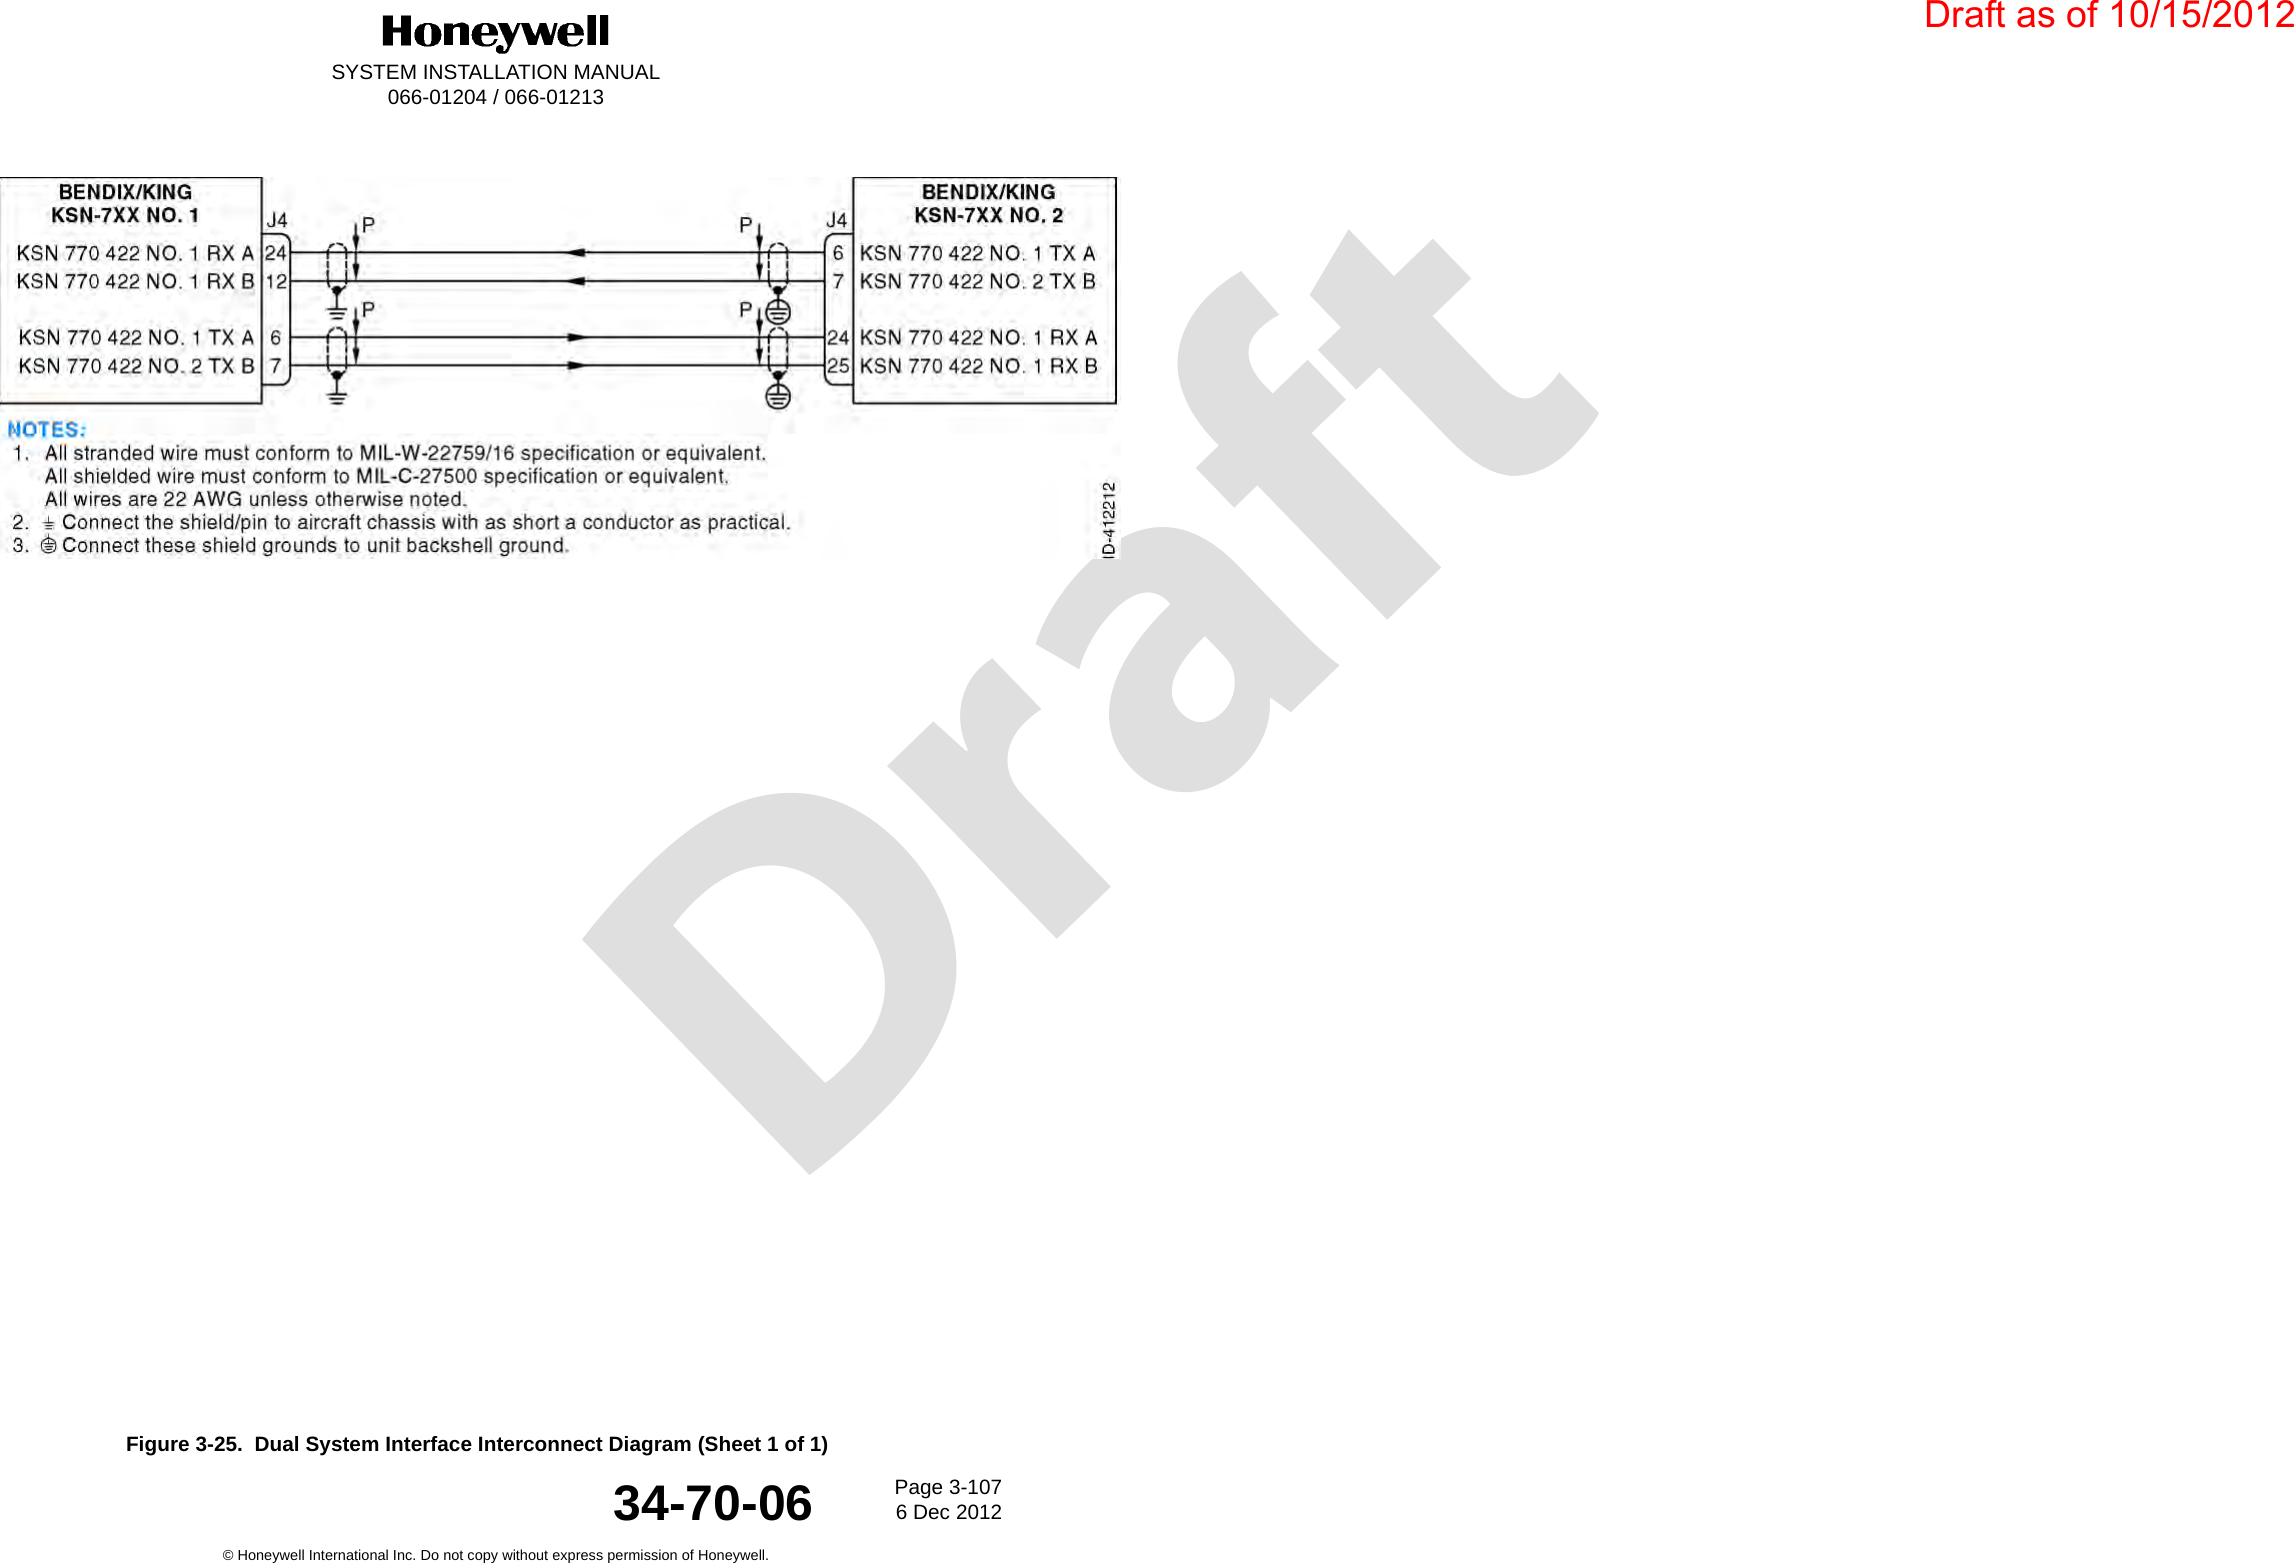 DraftSYSTEM INSTALLATION MANUAL066-01204 / 066-01213Page 3-1076 Dec 2012© Honeywell International Inc. Do not copy without express permission of Honeywell.34-70-06Figure 3-25.  Dual System Interface Interconnect Diagram (Sheet 1 of 1)Draft as of 10/15/2012